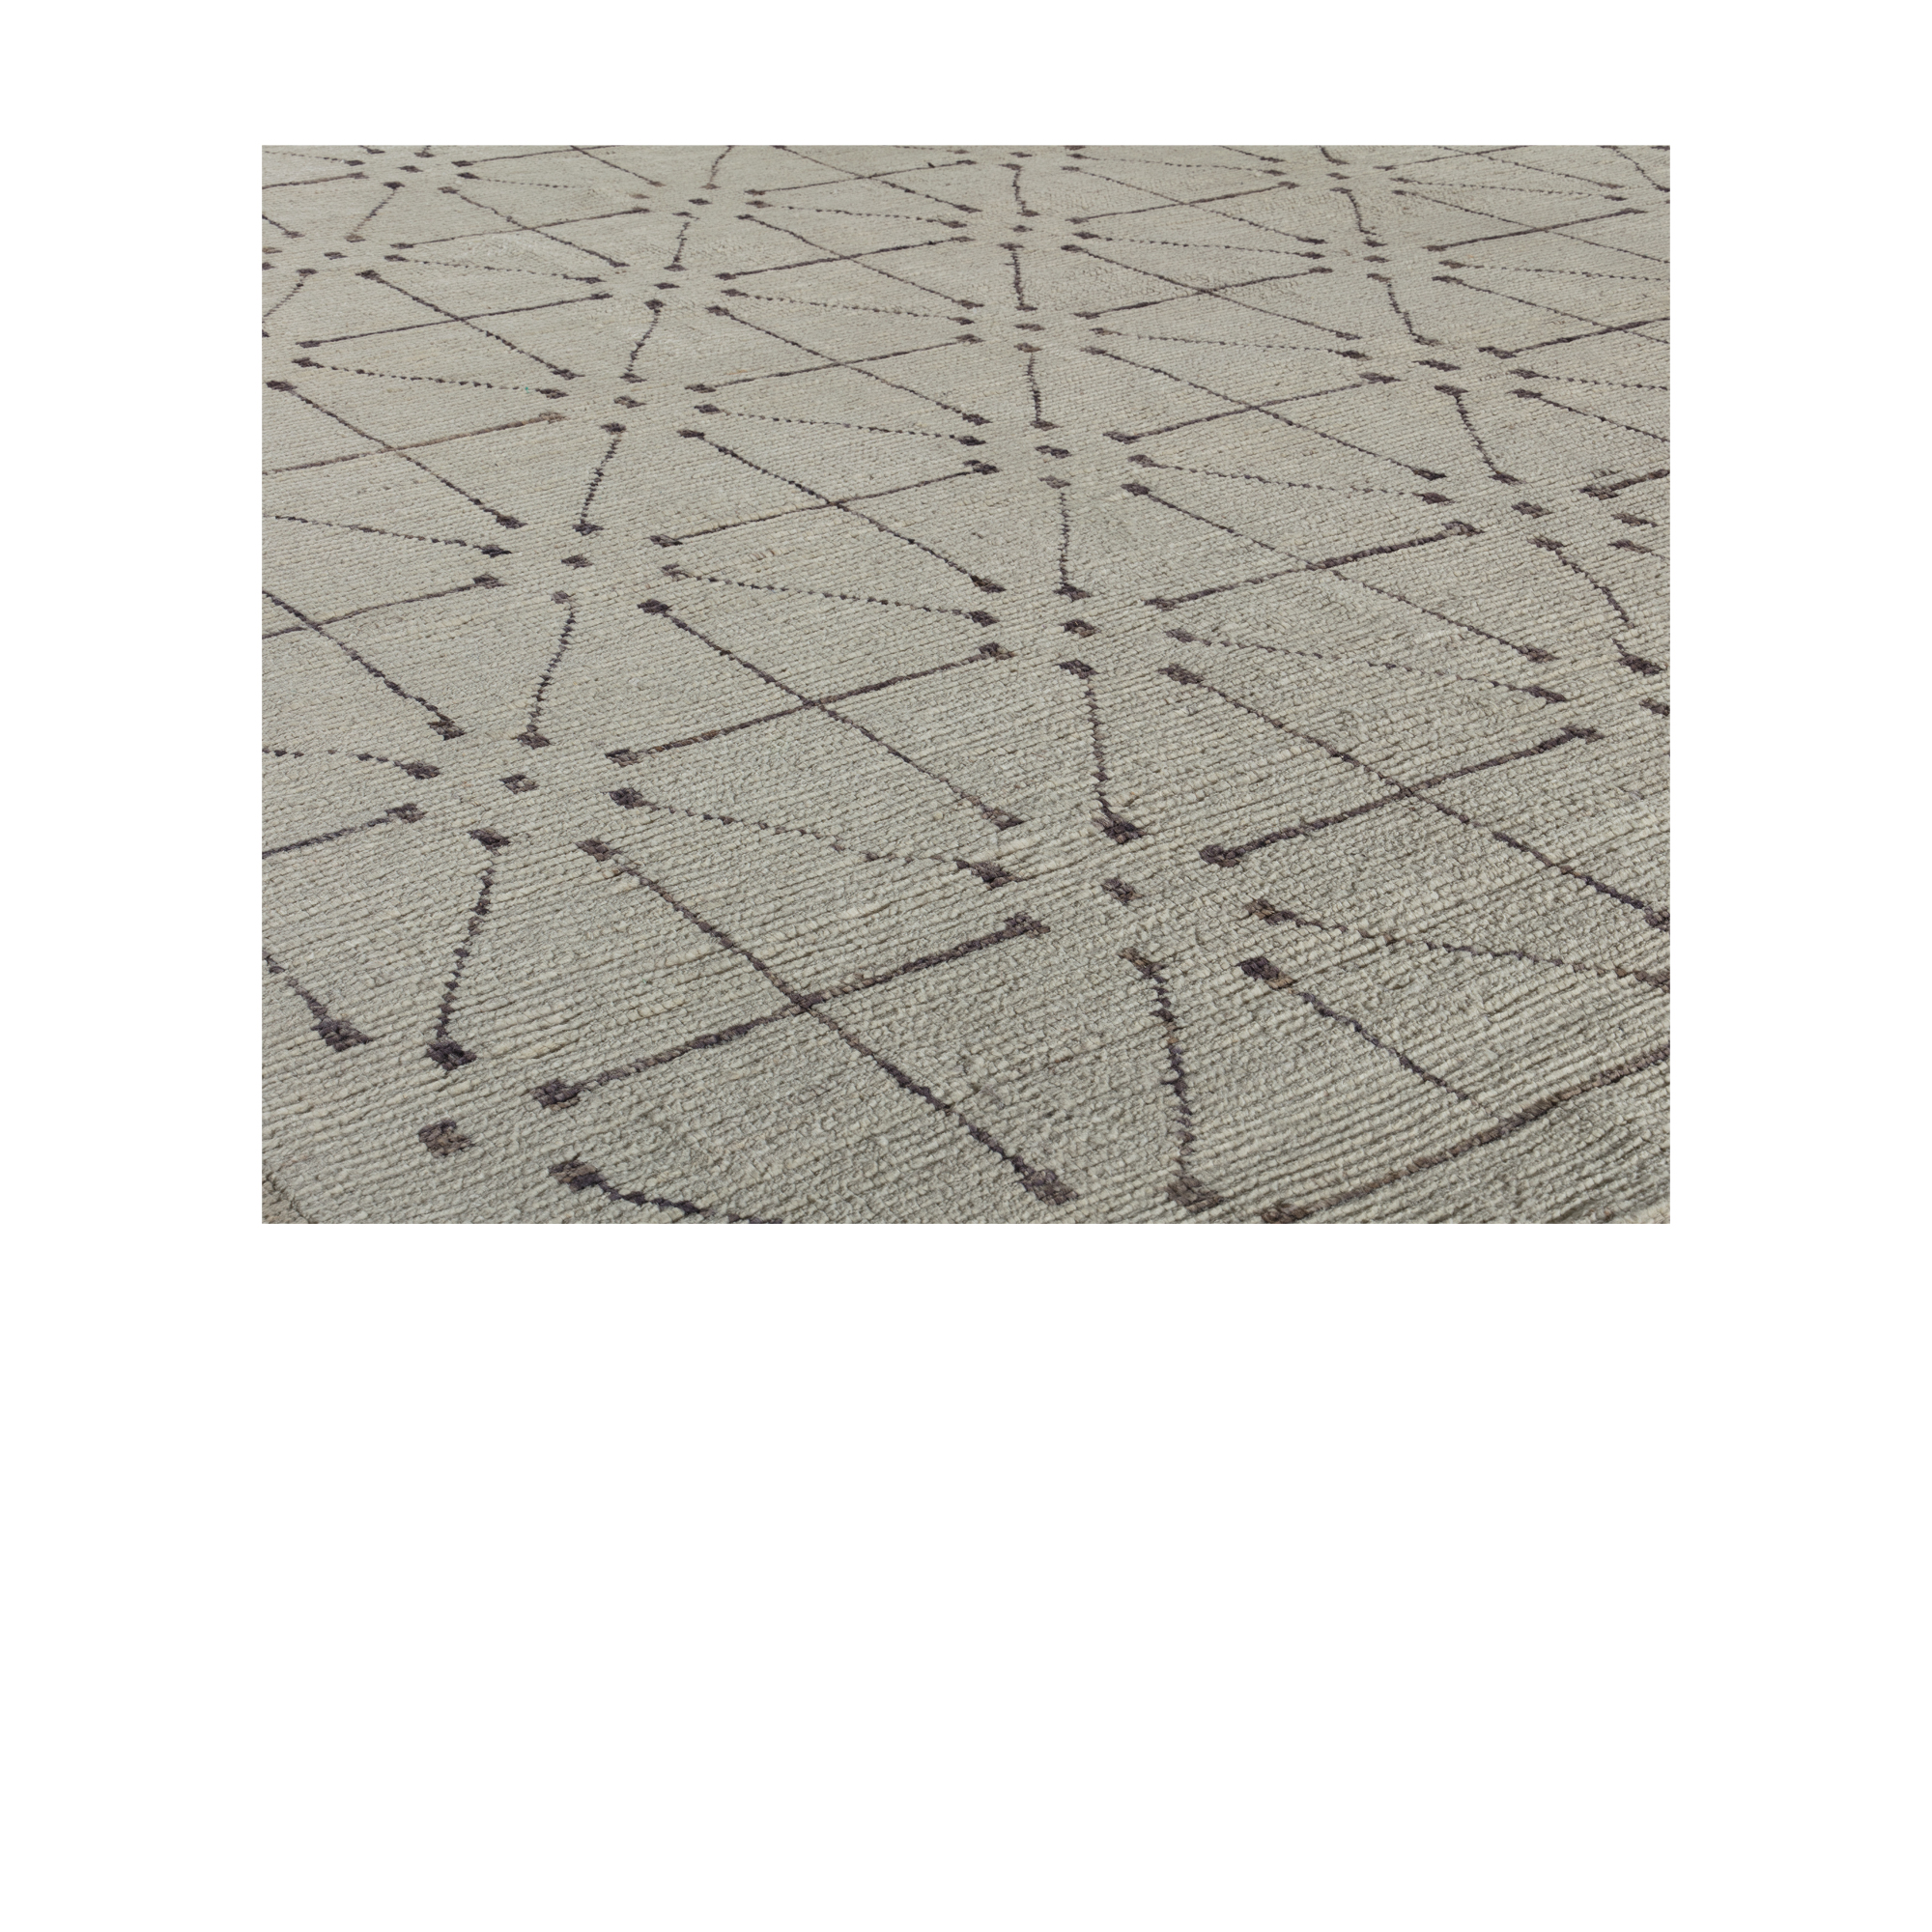 Our Trellis rug  is hand-knotted, and made from the finest hand-carded, hand-spun naturally dyed wool with silk accent.